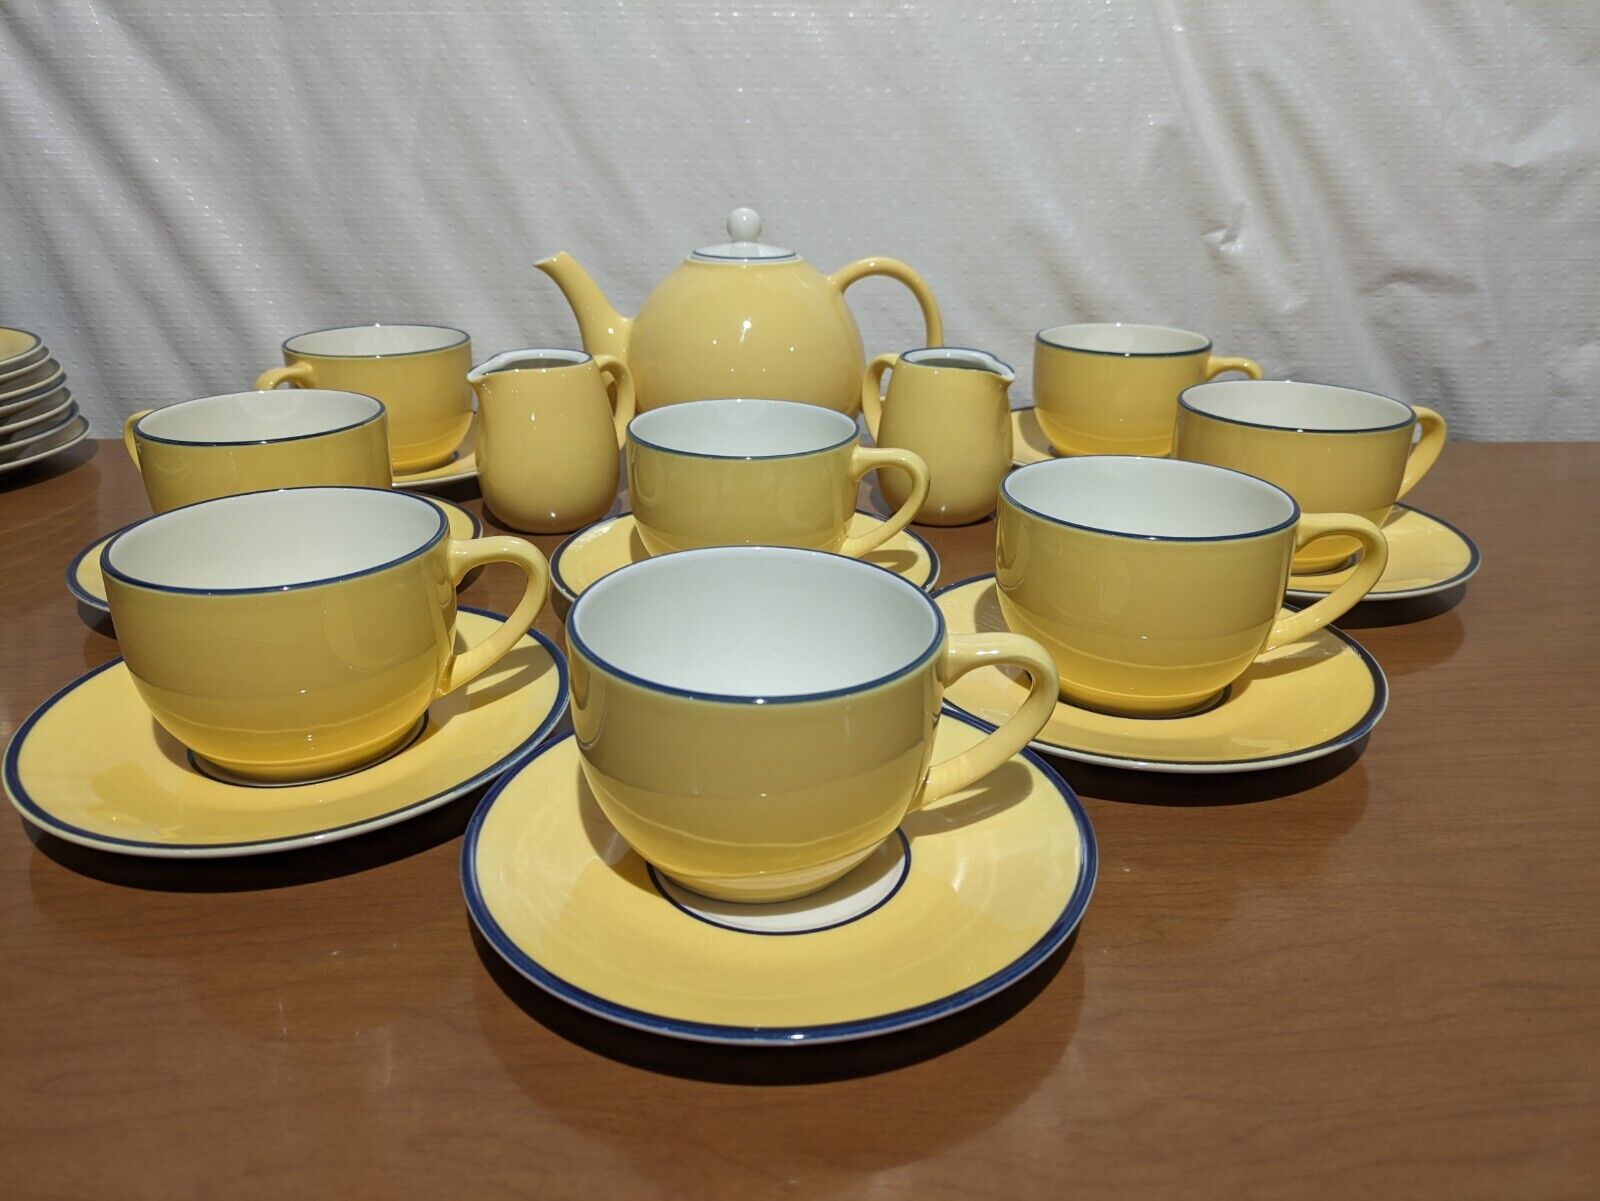 Pagnossin Treviso Spa Yellow Tea Service For 8 - Tea Pot - Creamers - Cup N...